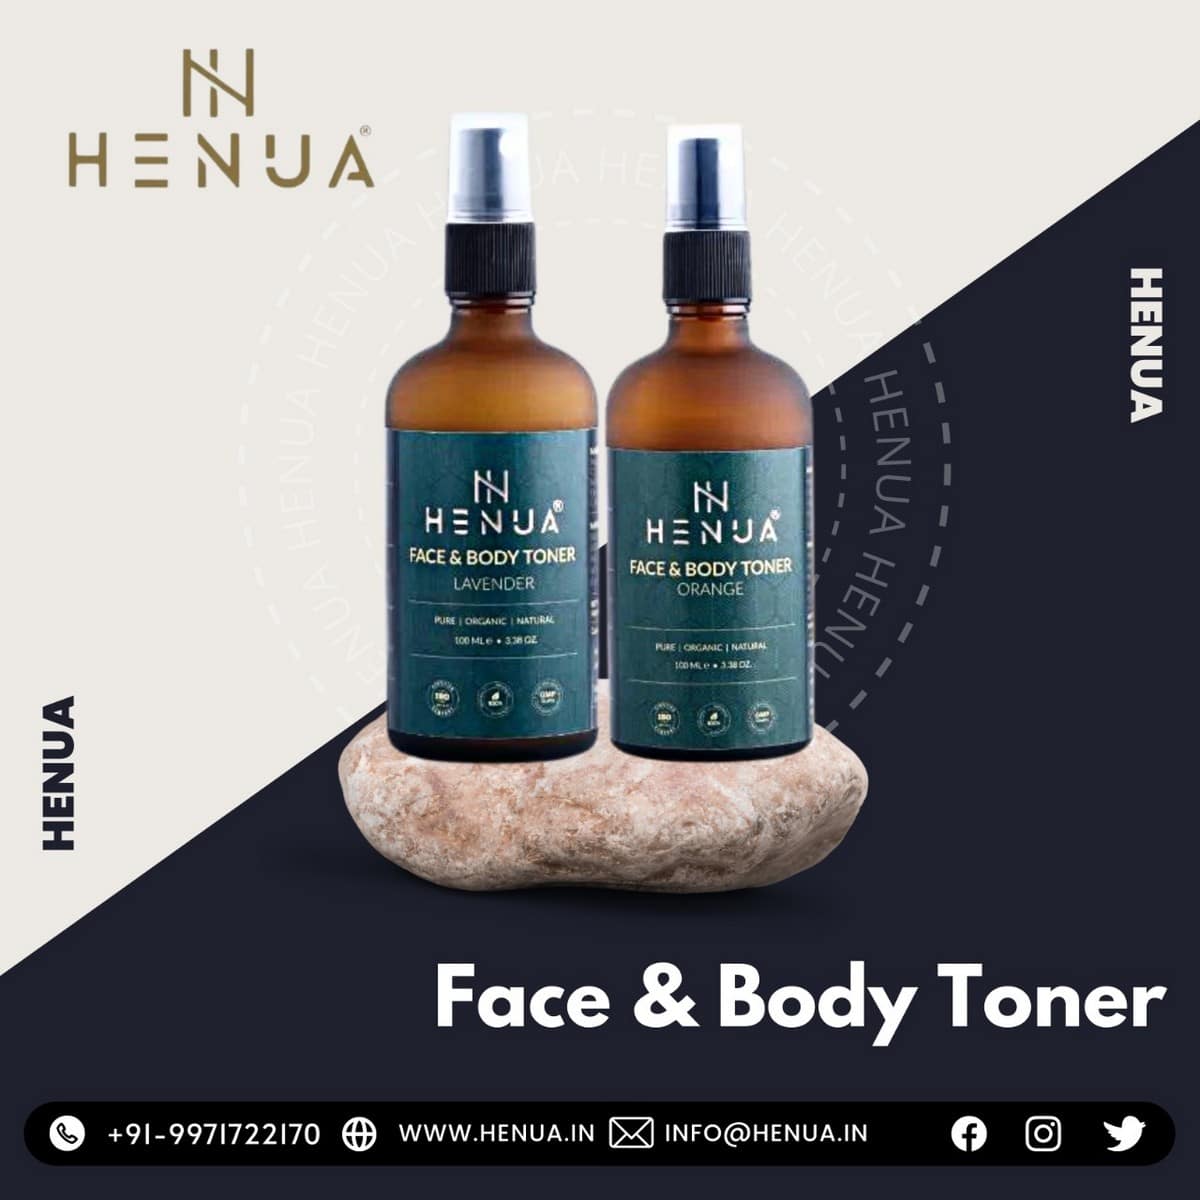 A-Face-And-Body-Toner-Is-Made-With-All-Natural-Ingredients